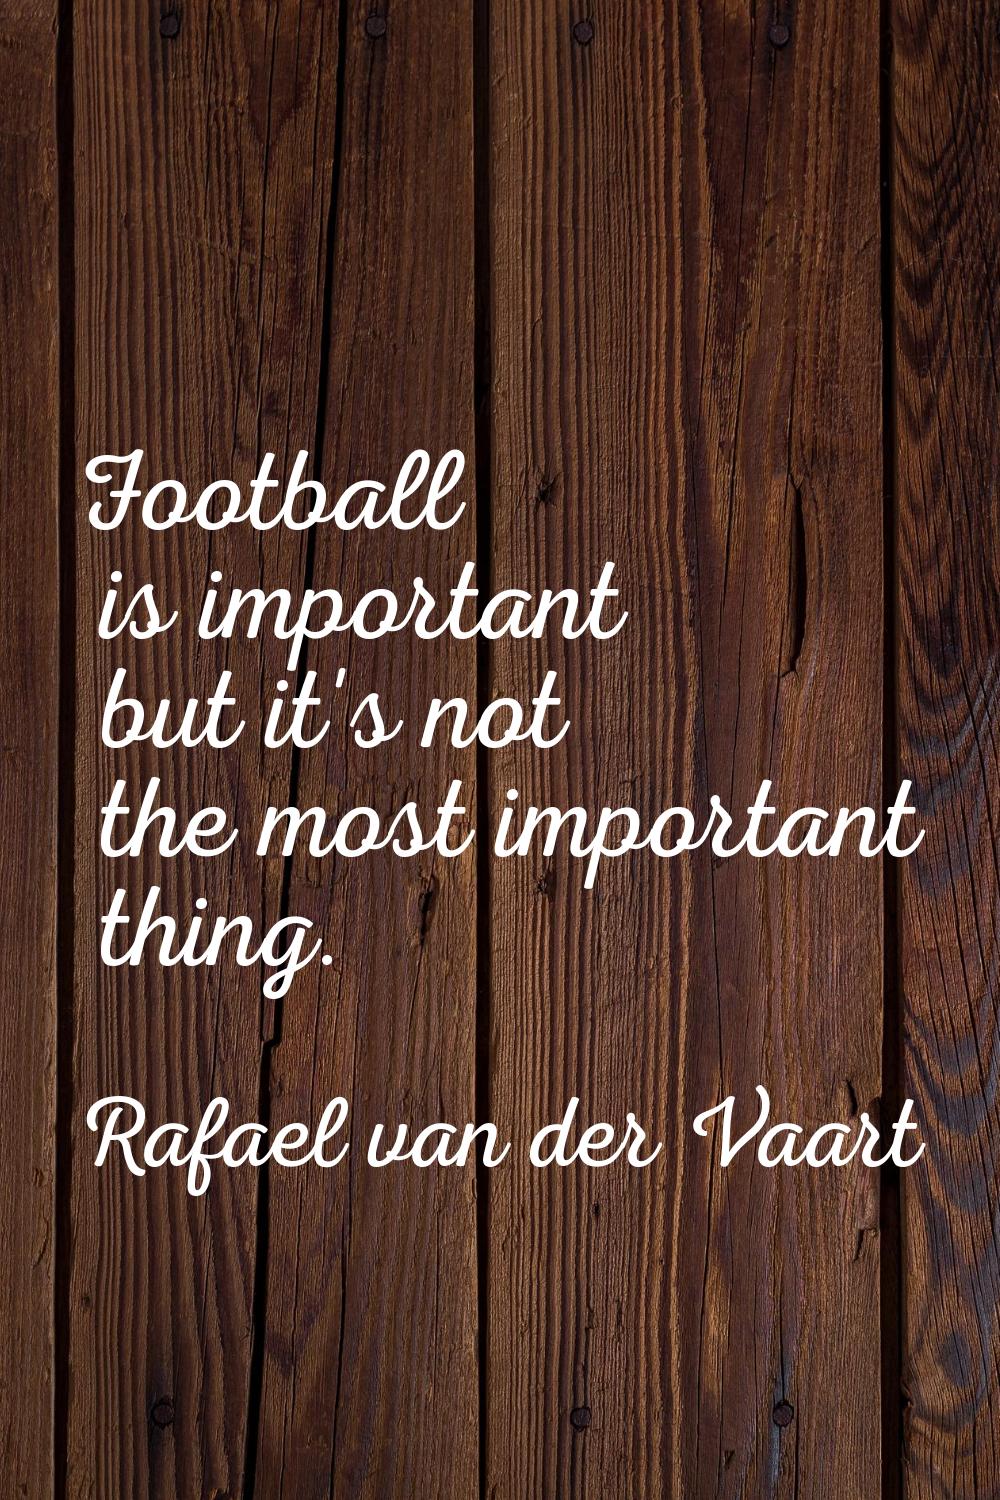 Football is important but it's not the most important thing.